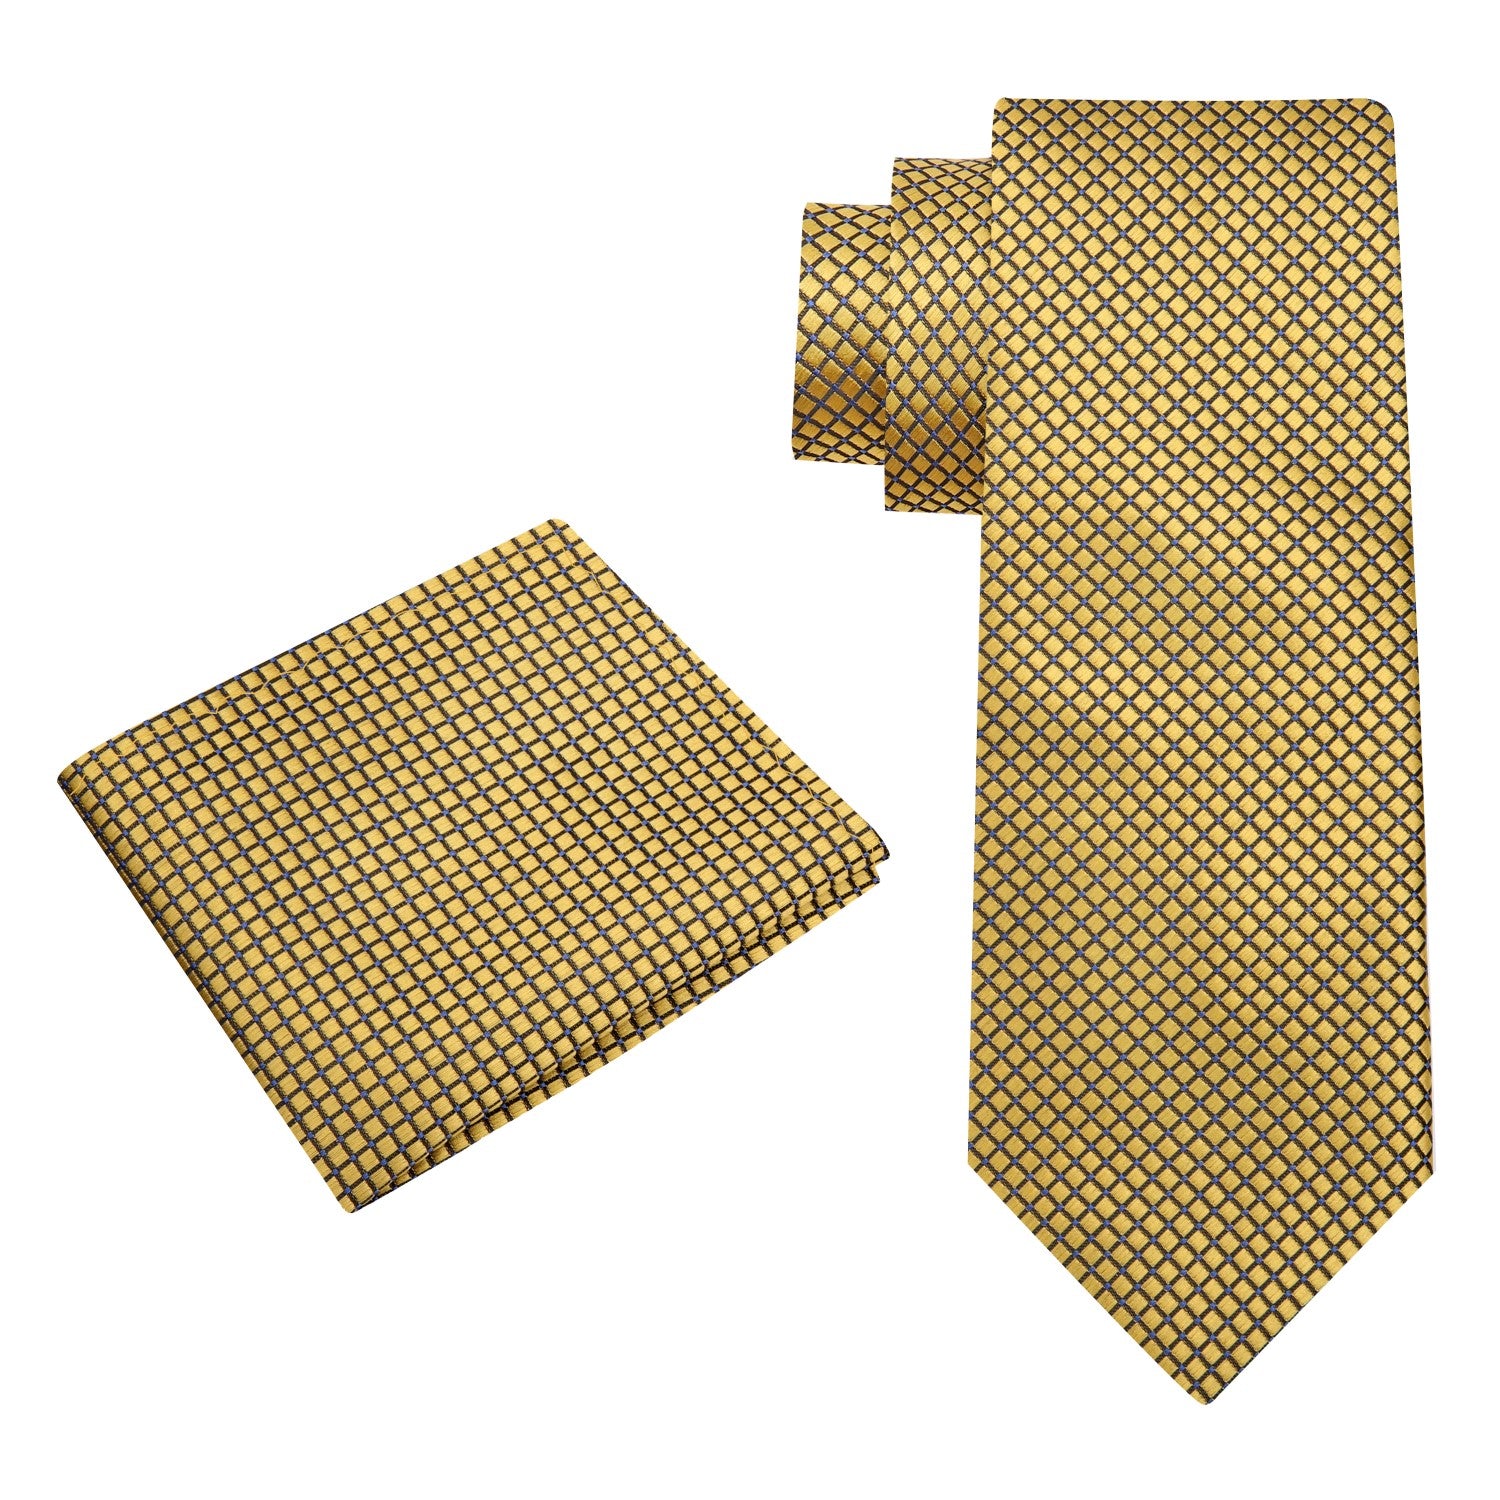 View 2: Gold Geometric Tie and Square